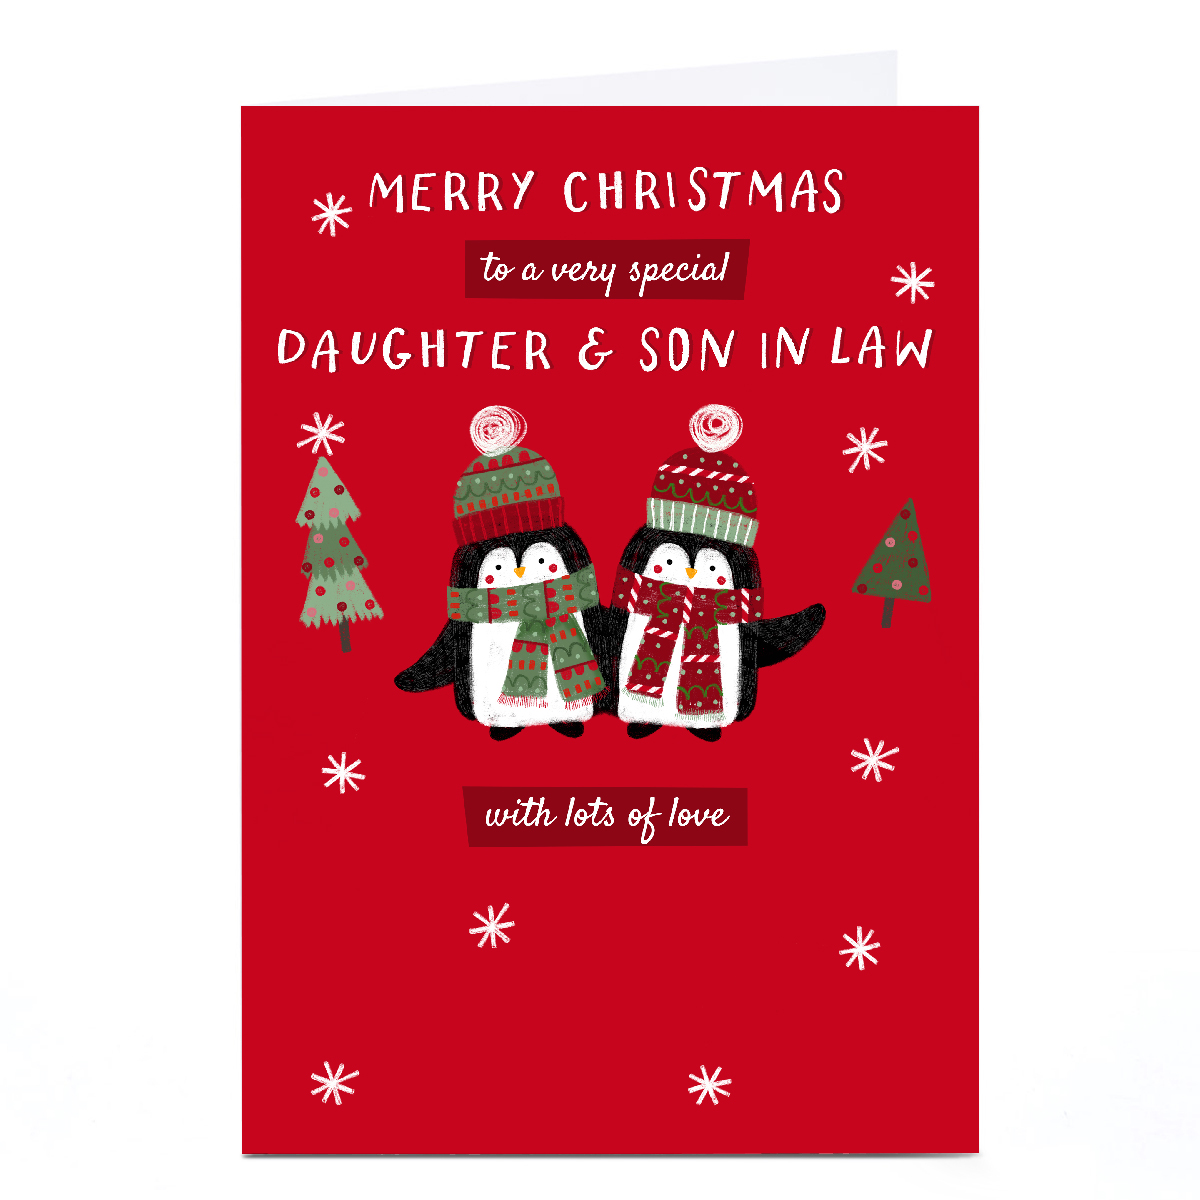 Personalised Kerry Spurling Christmas Card - Bundled up Penguins, Daughter & Son in Law 